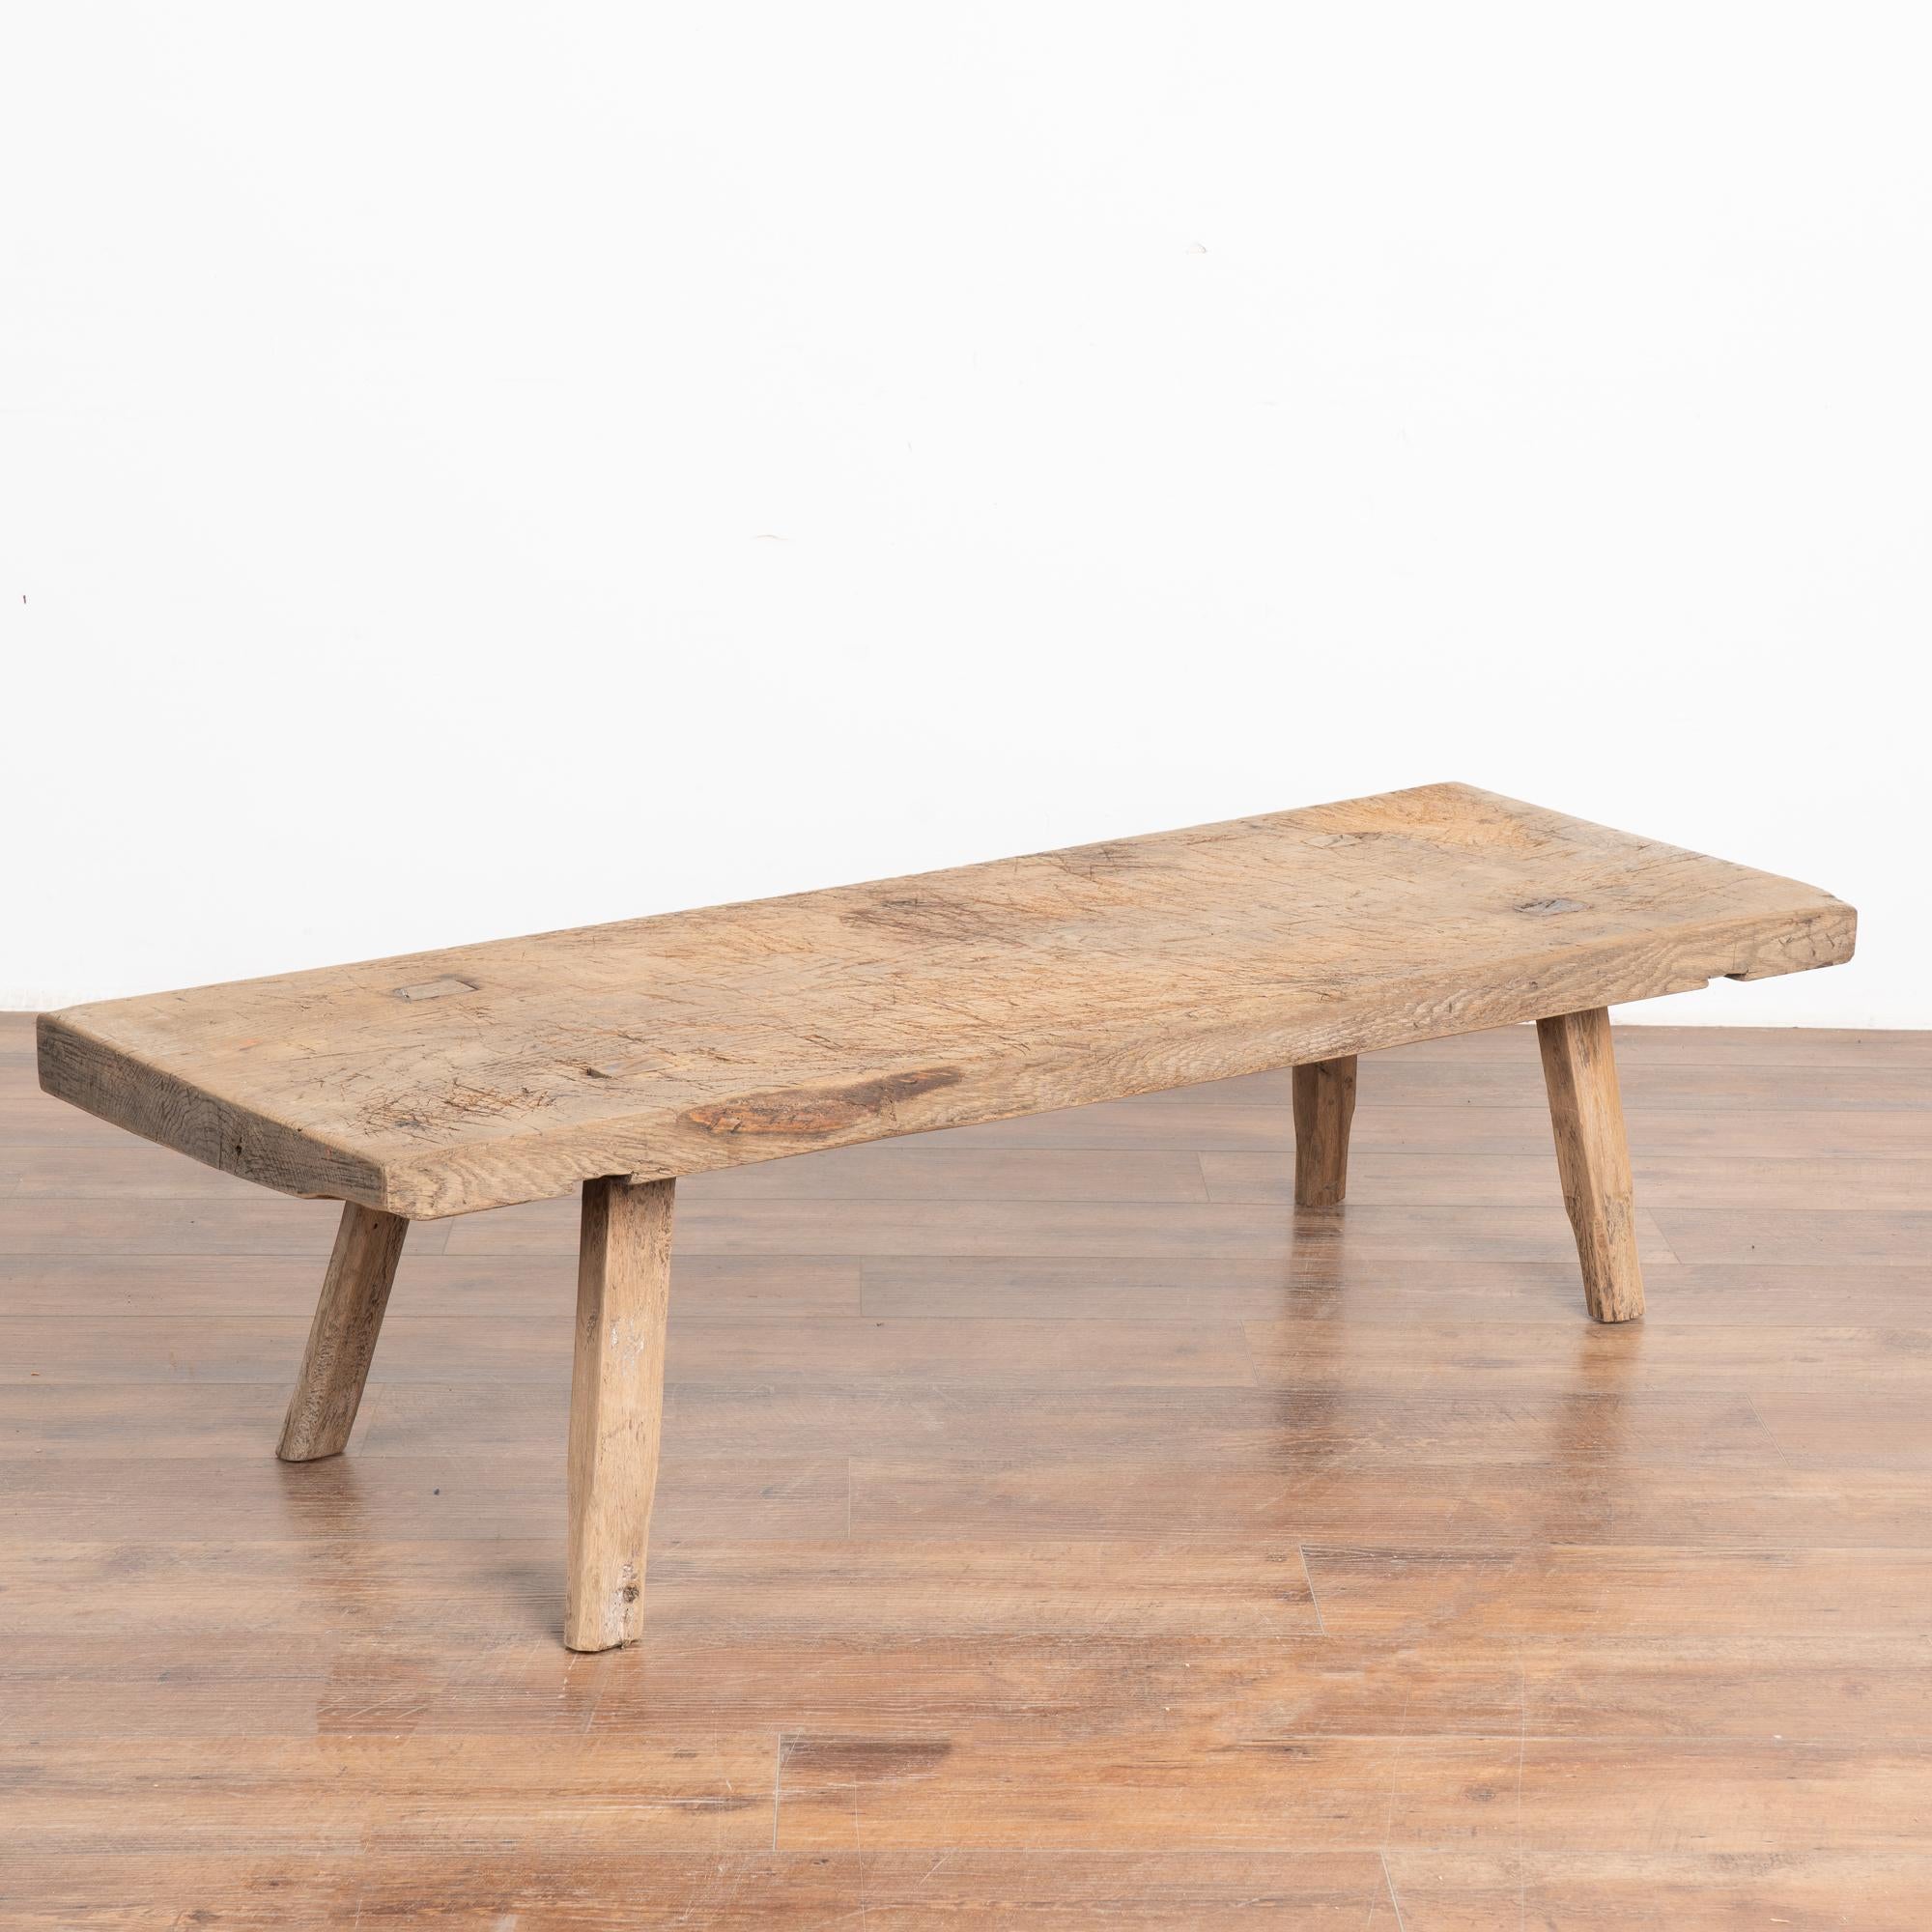 The appeal of this rustic coffee table comes from the thick wood of the top that originally served as a work table.
The slab of wood that serves as the top is impressive and creates the desire to touch it. Note the heavy wear including gouges,